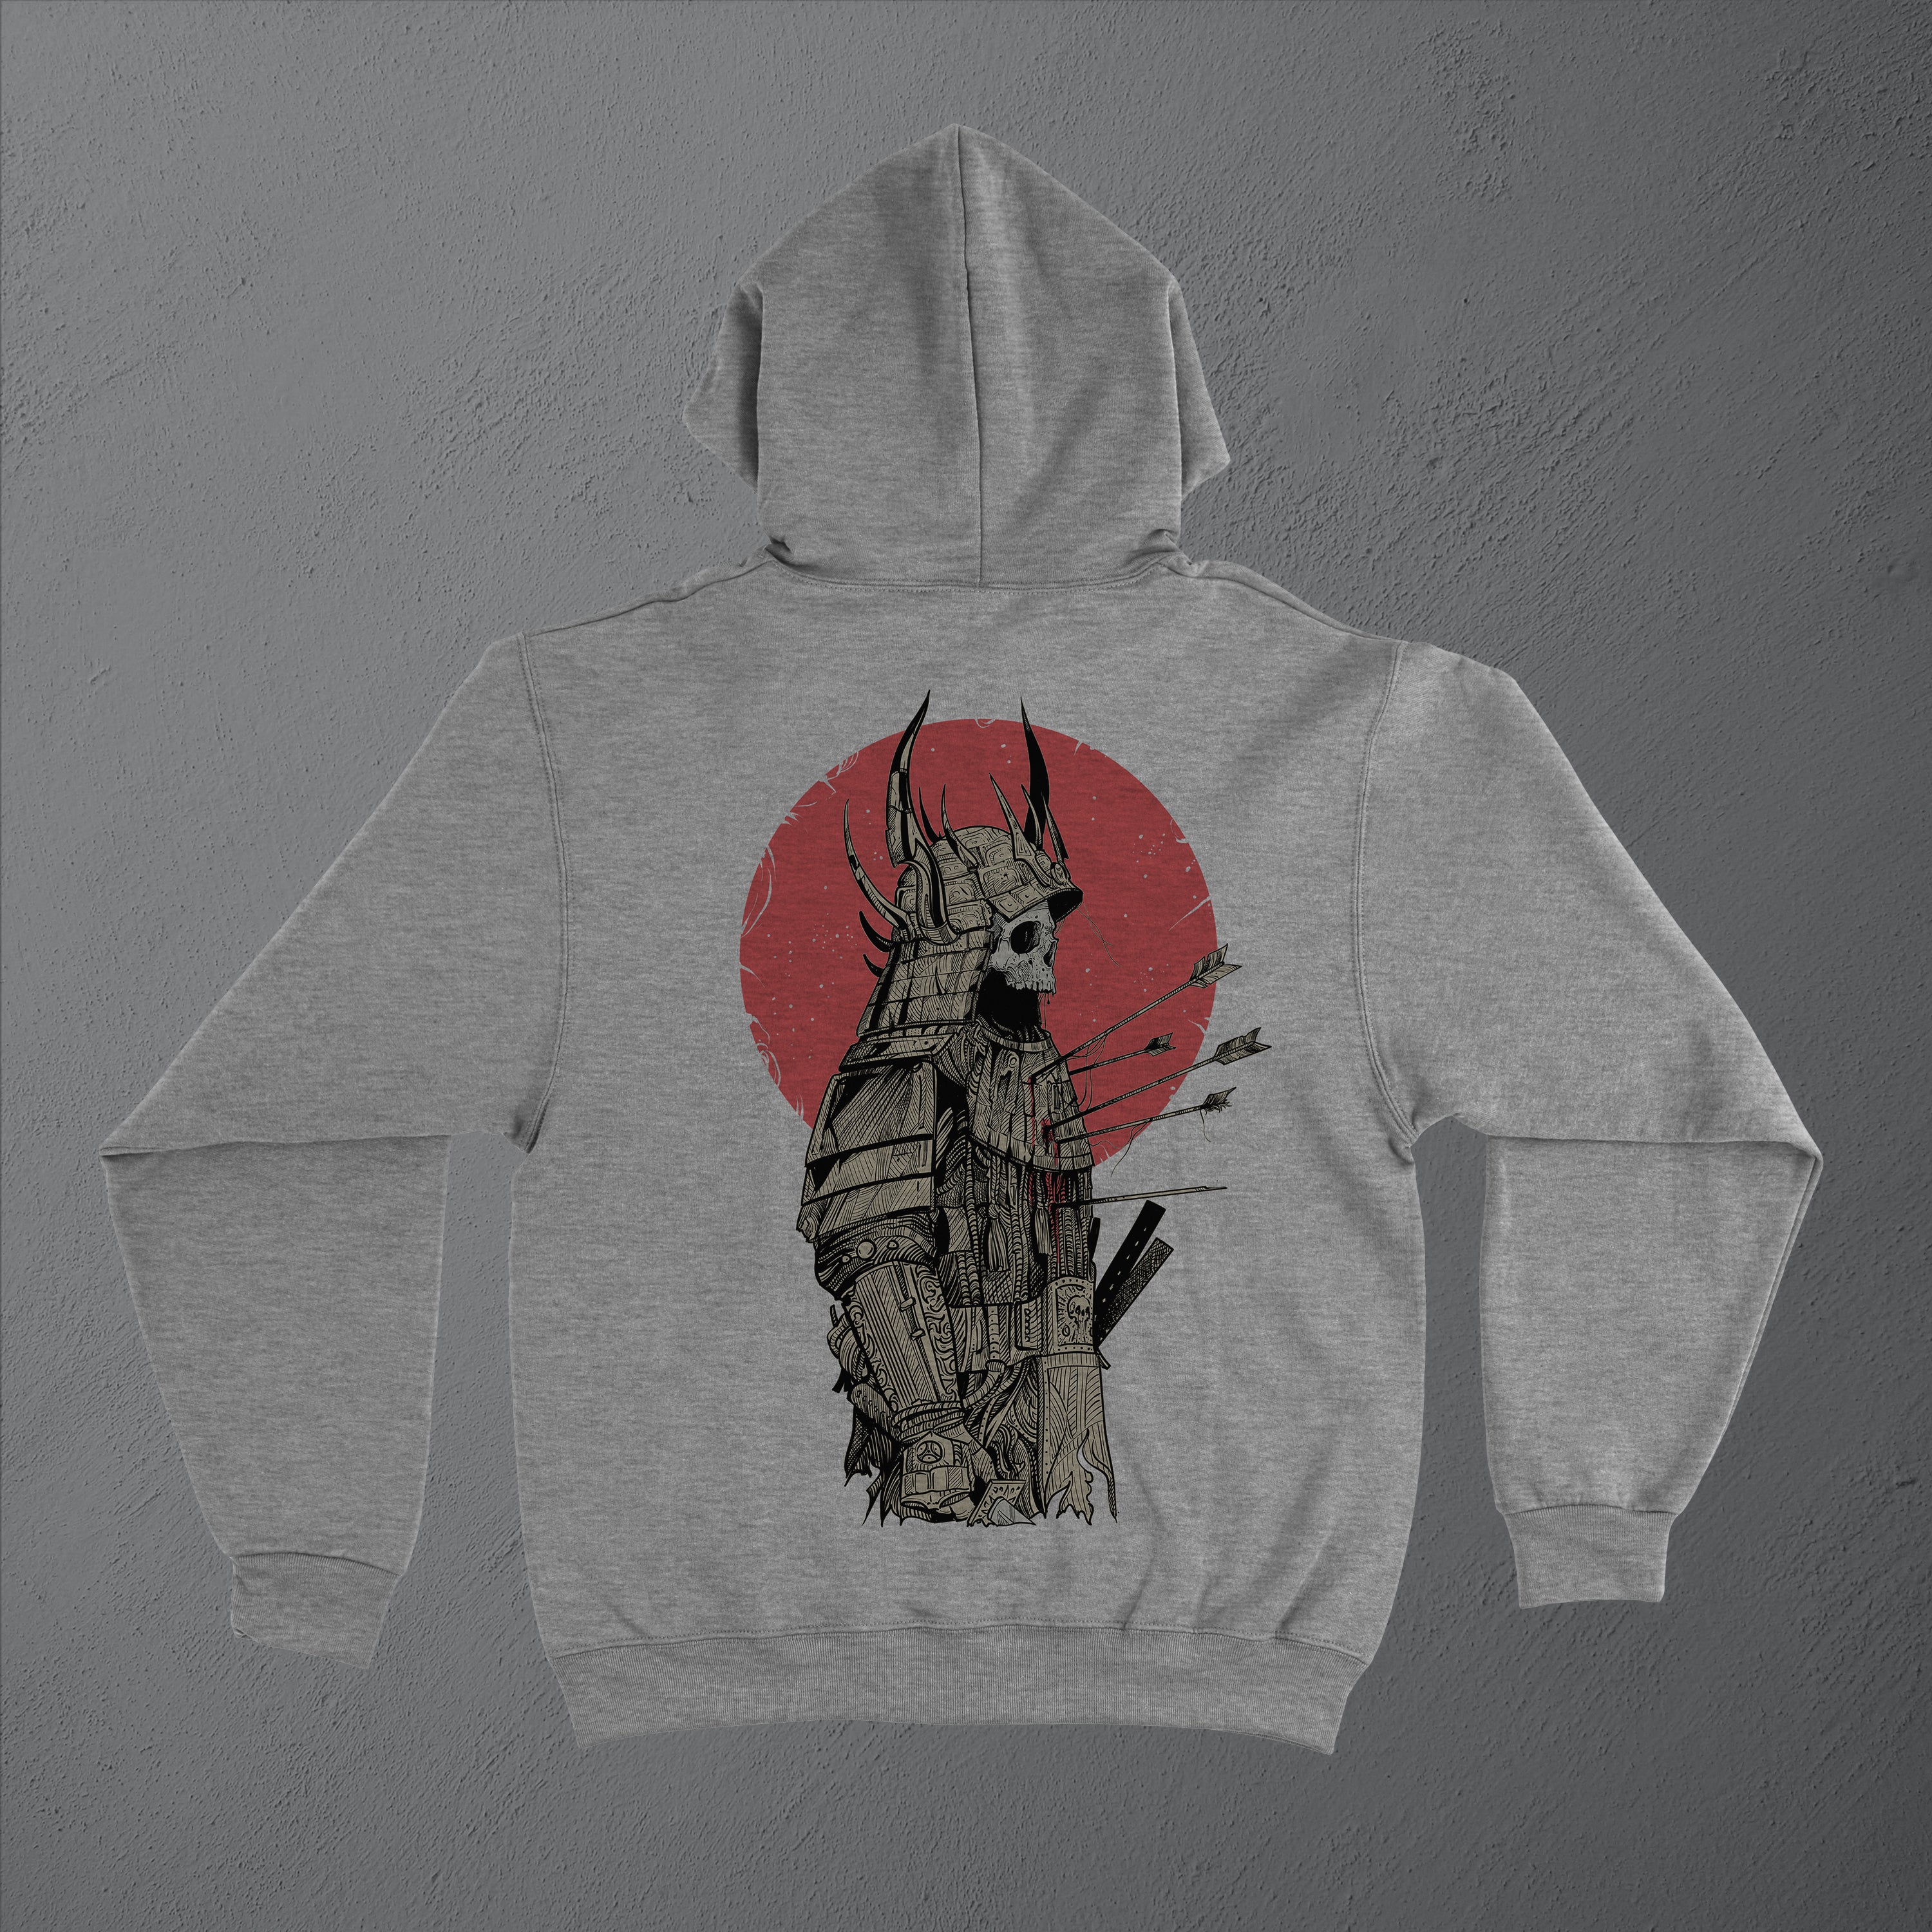 Traditionally Violent - Hoodie